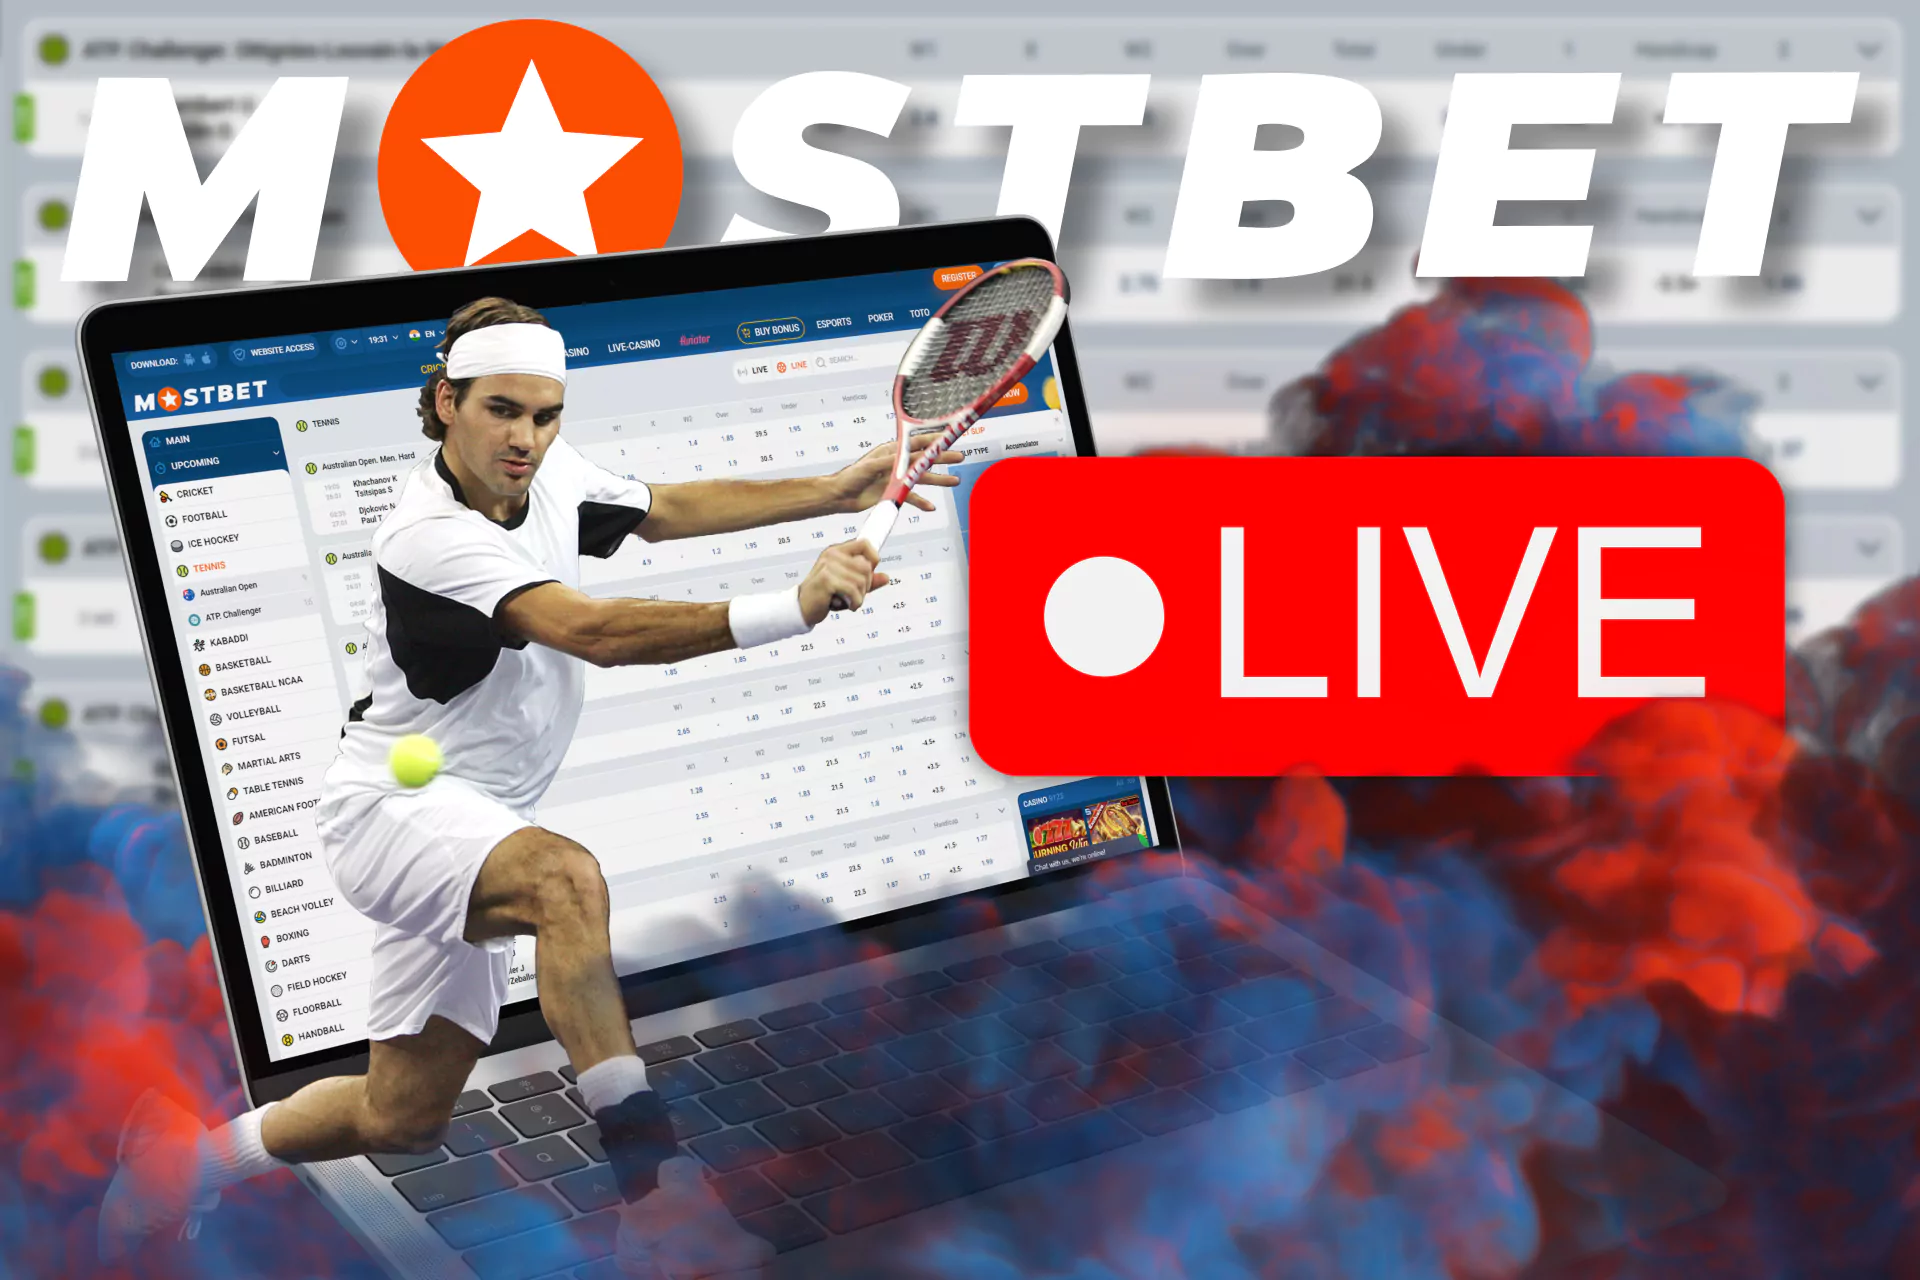 Place tennis bets with Mostbet during the live broadcast.